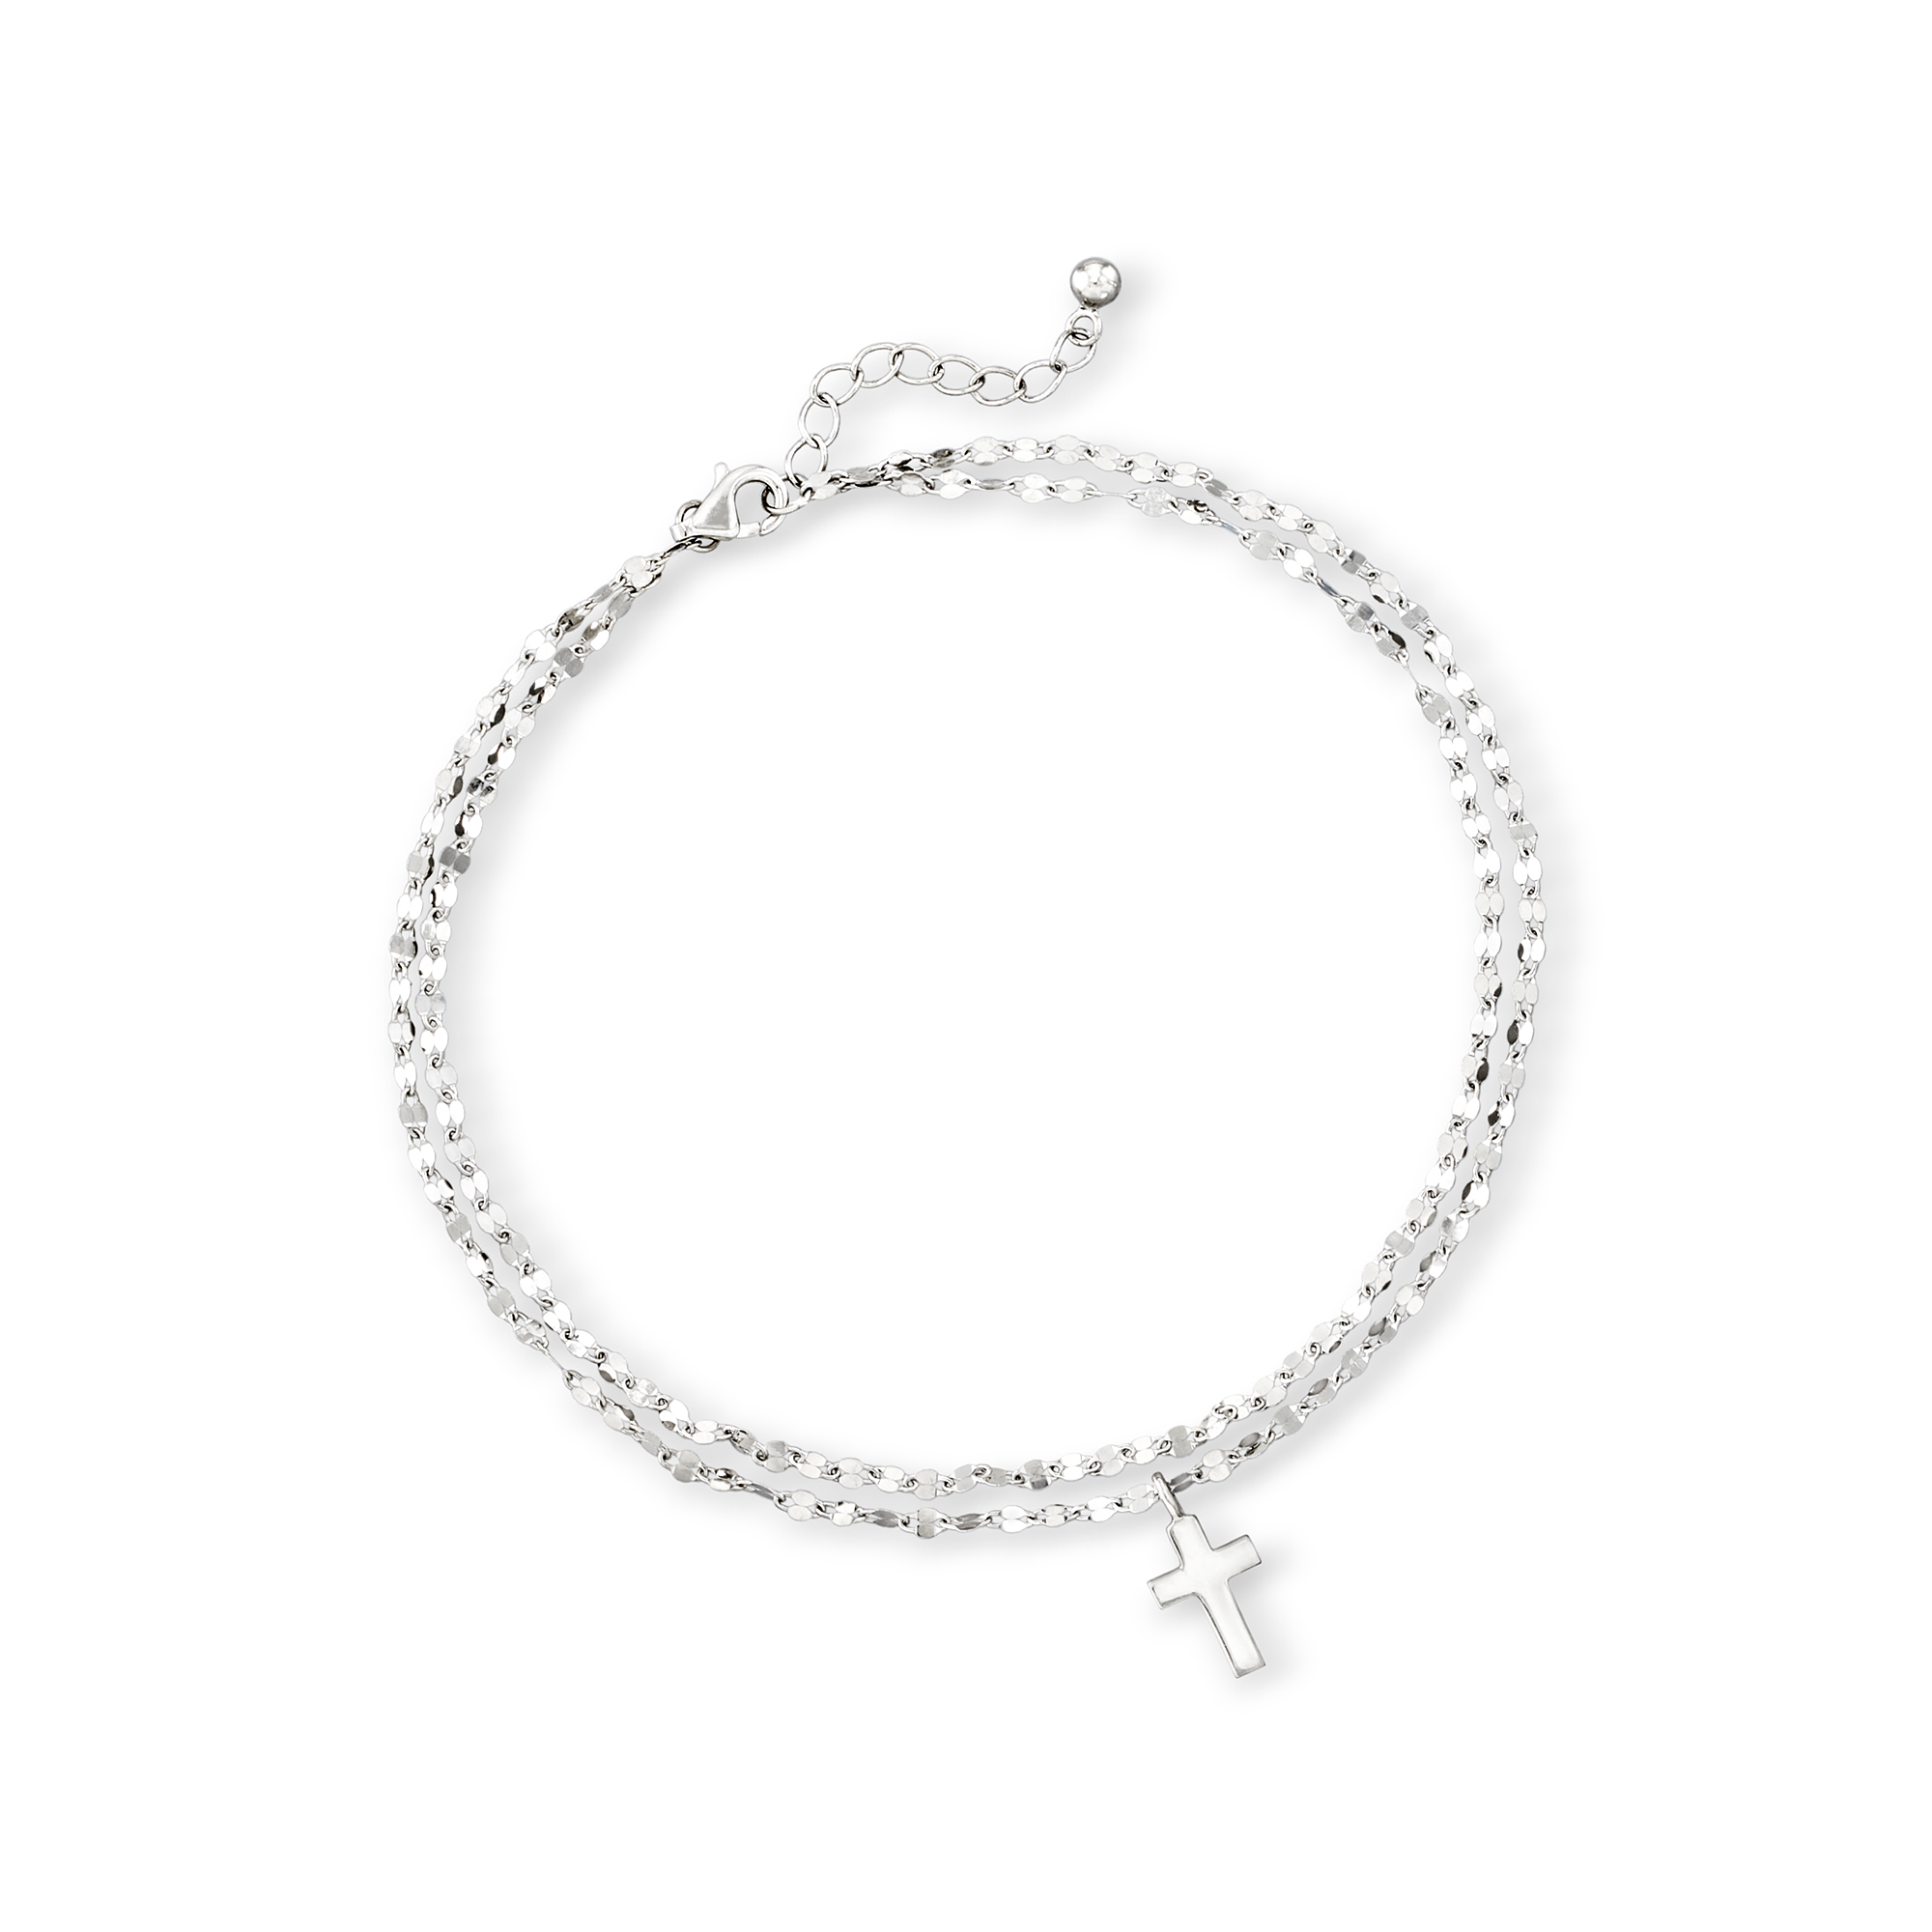 petite 100% Sterling Silver Anklet Double Chain 